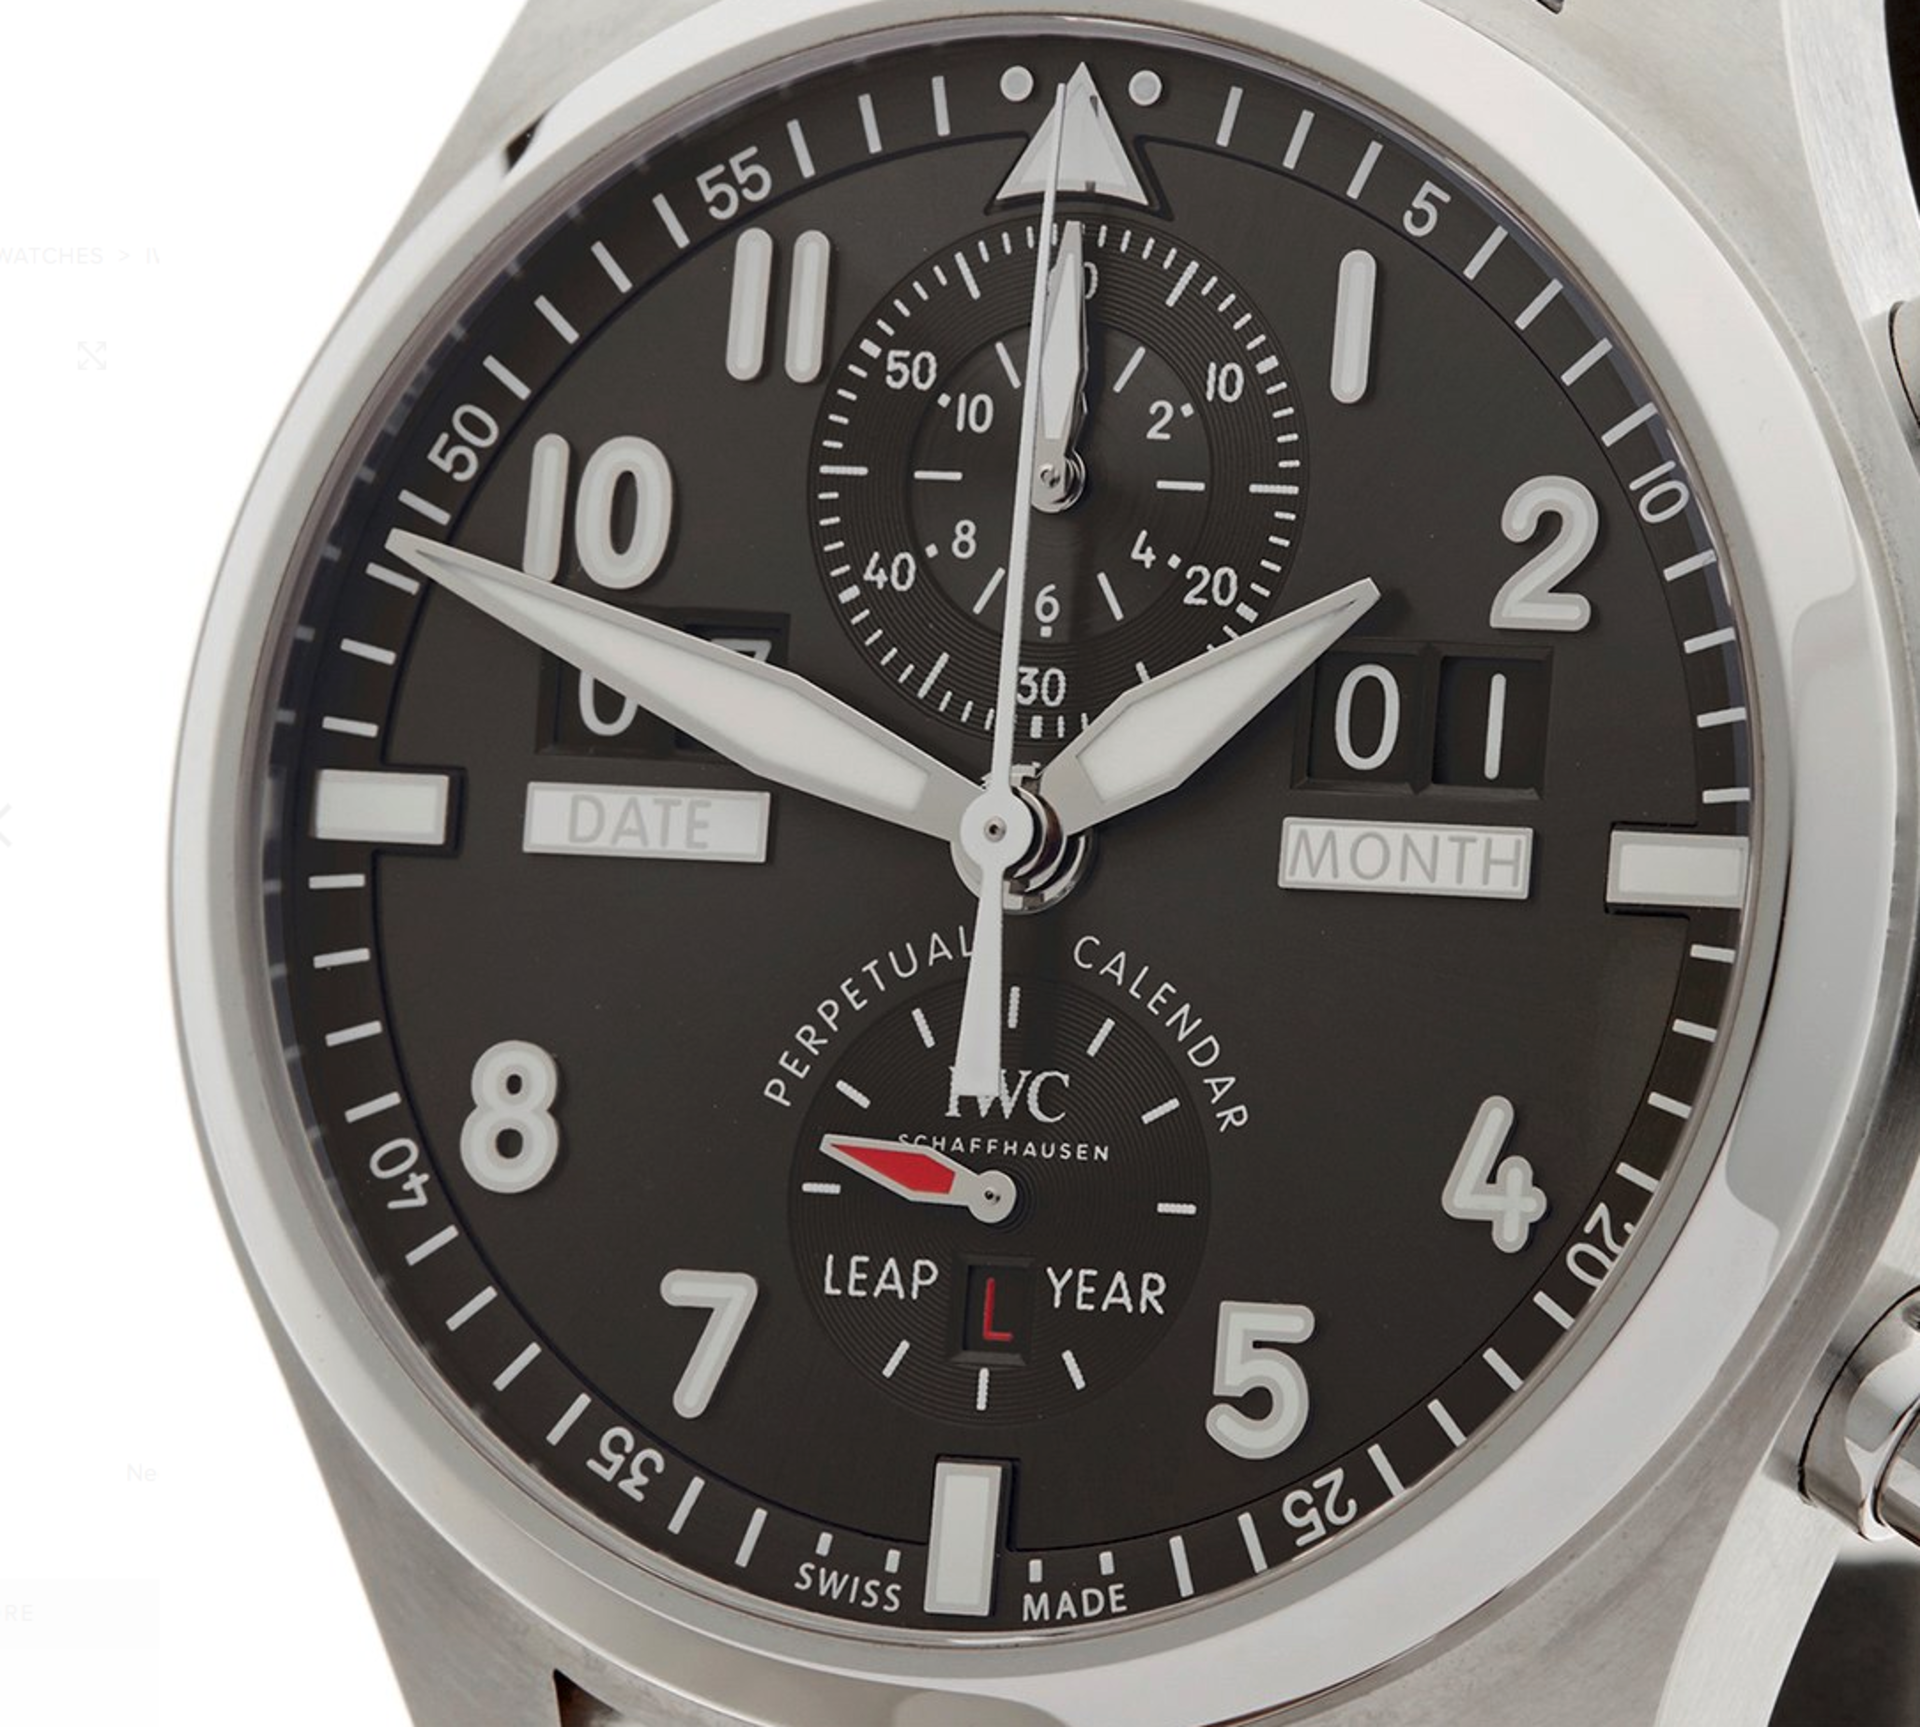 IWC Pilot's Perpetual Calendar 46mm Stainless Steel - IW379108